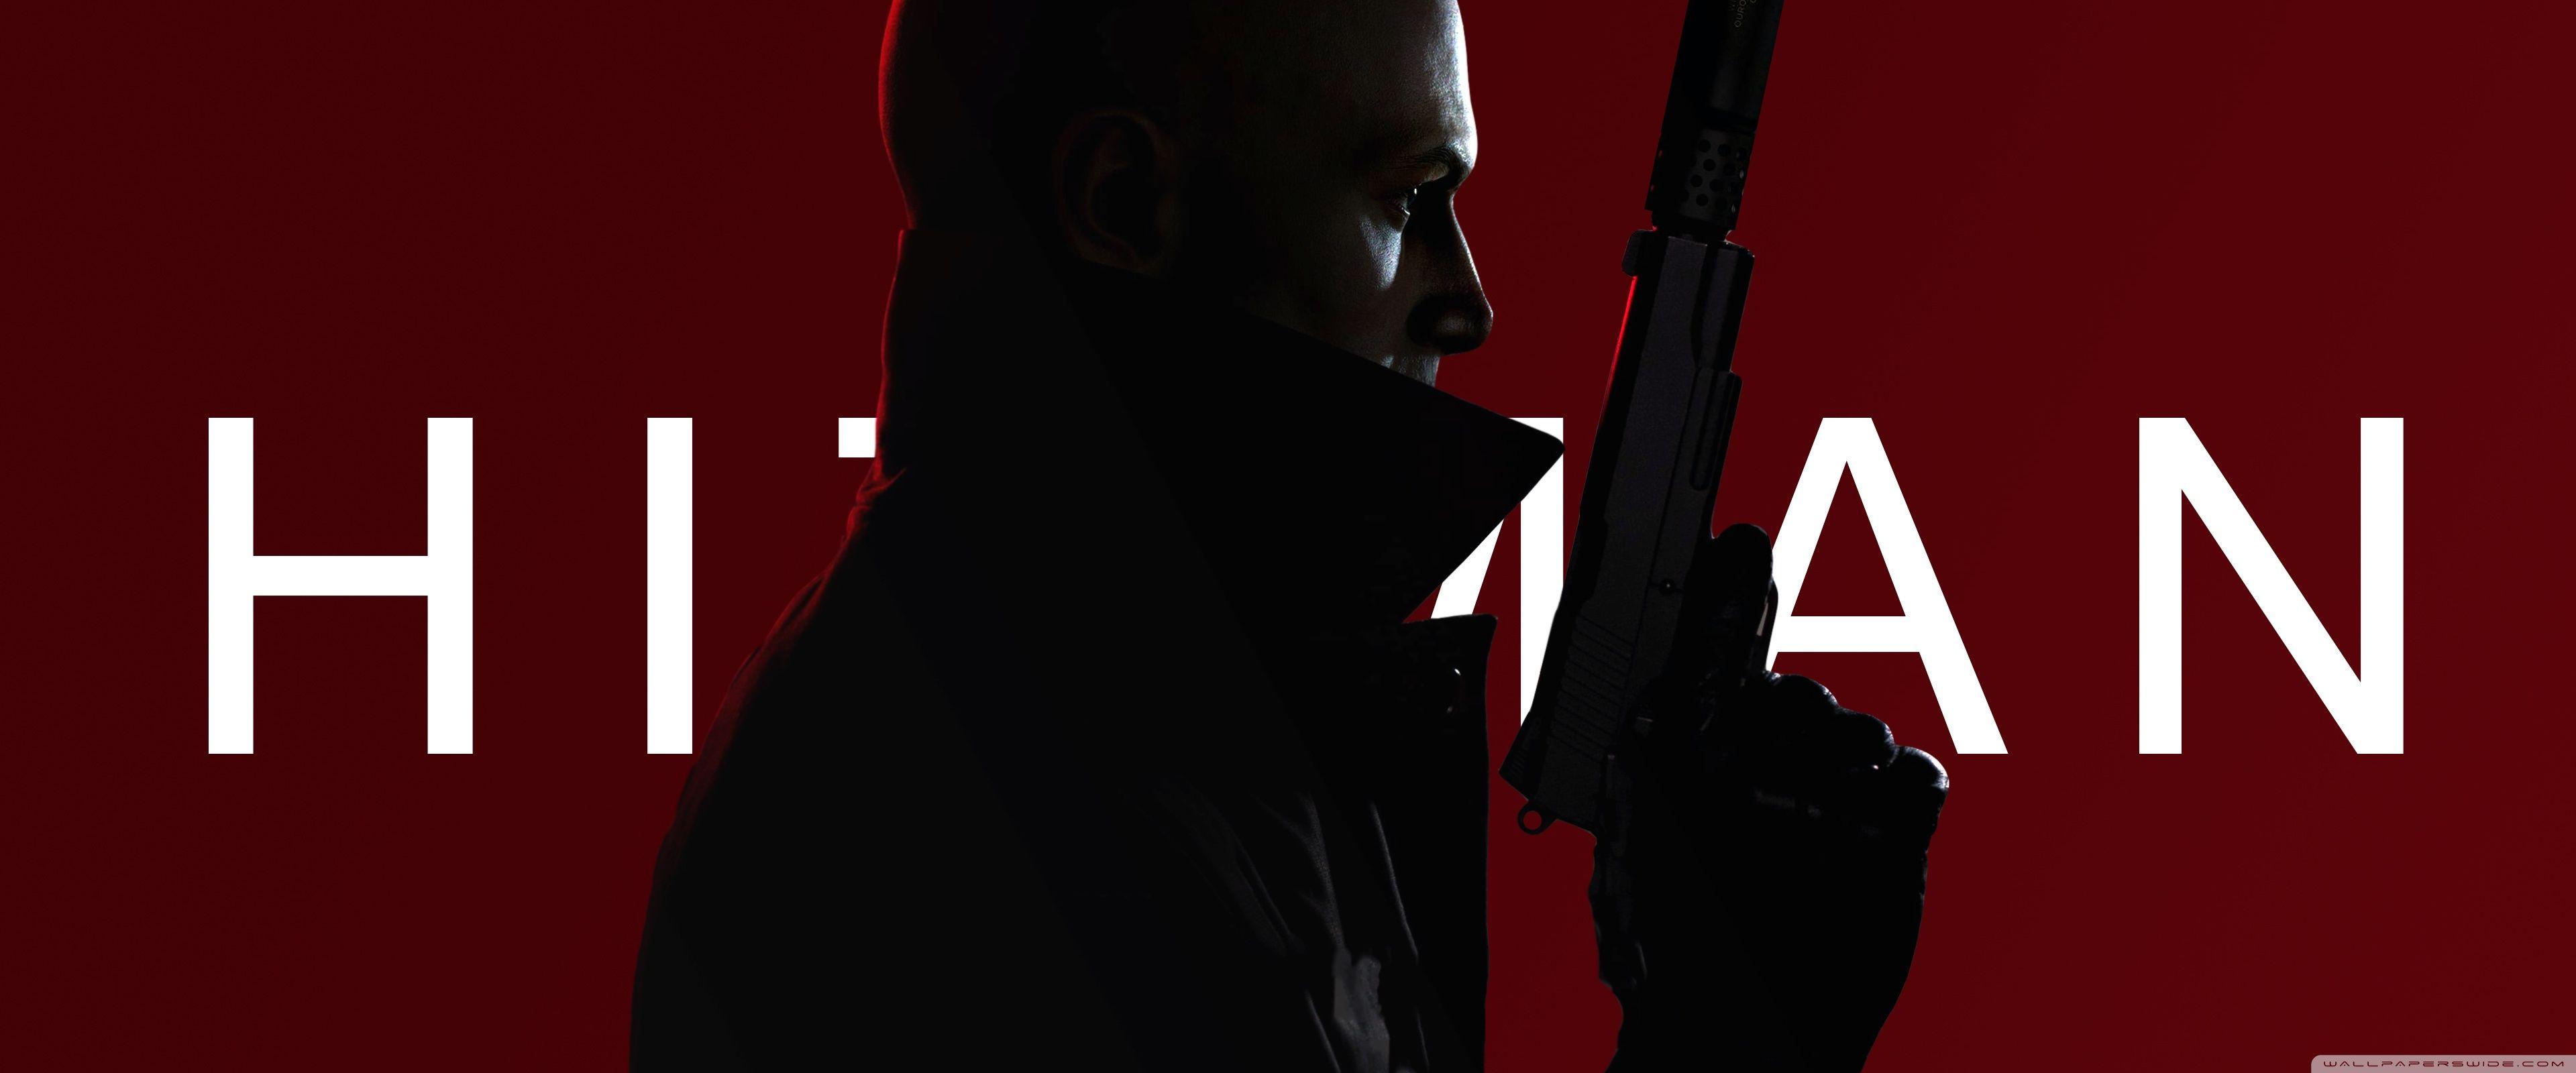 android hitman 2 wallpapers